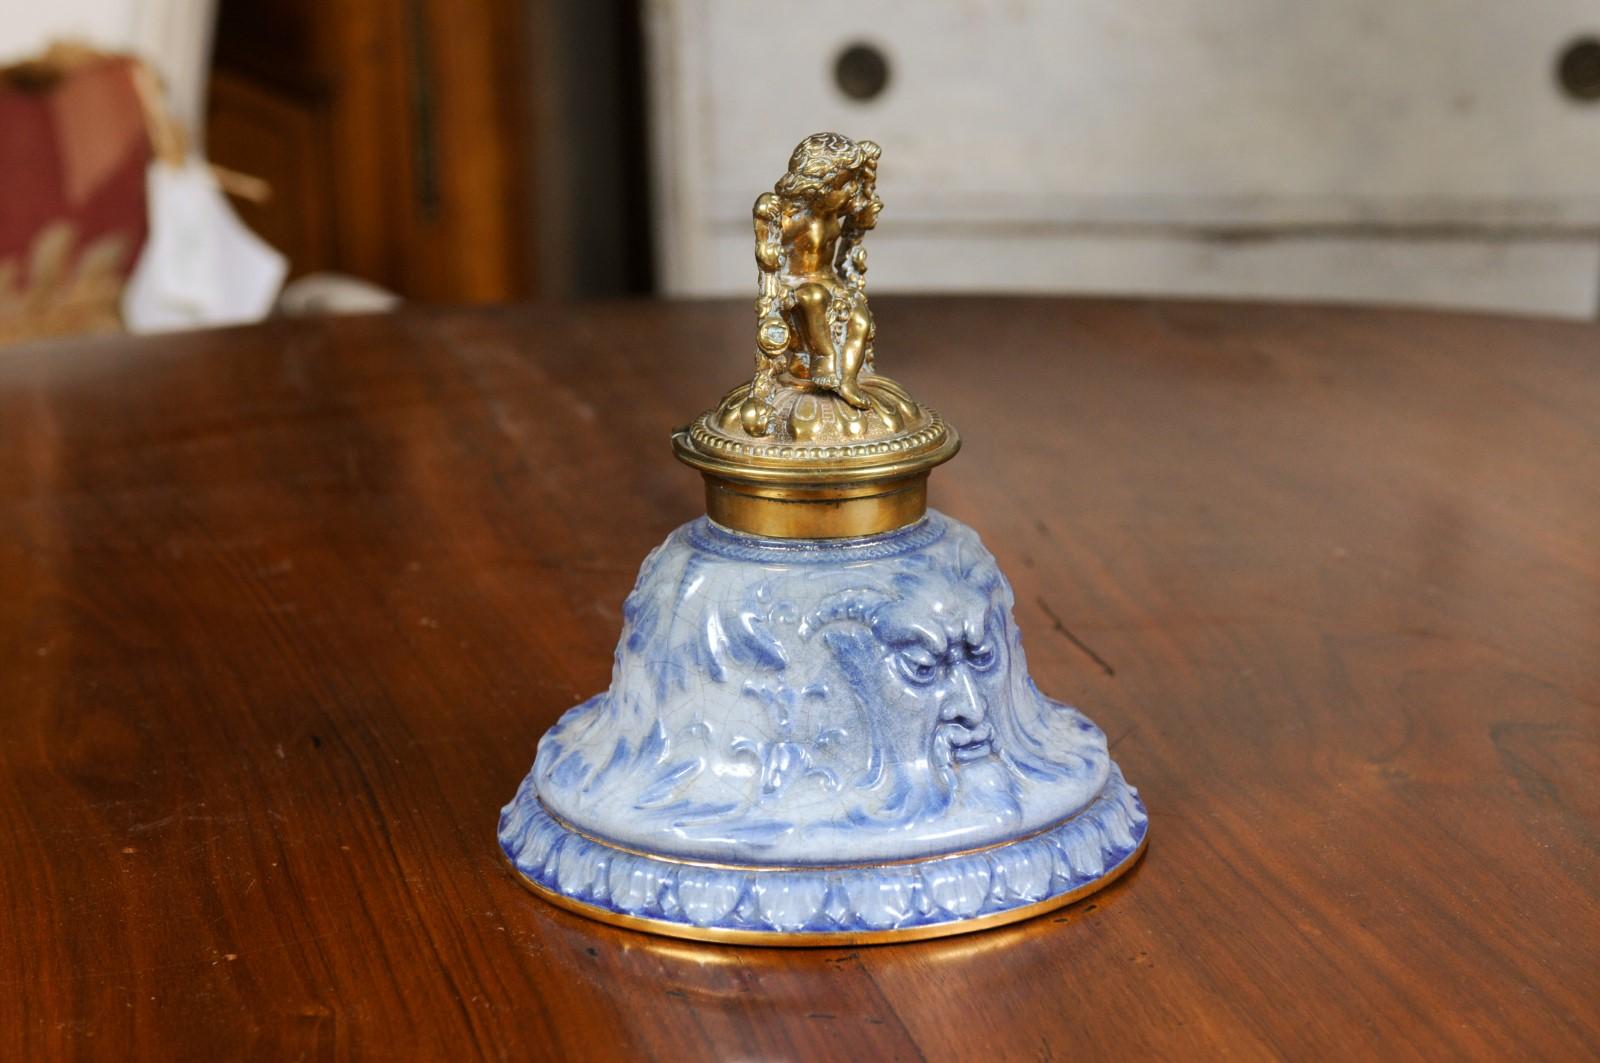 An English Victorian period porcelain and brass inkwell from the 19th century, with putto motif. Created in England during the Victorian era, this inkwell features a blue porcelain base adorned with satyrs and foliage motifs, topped with a handsome